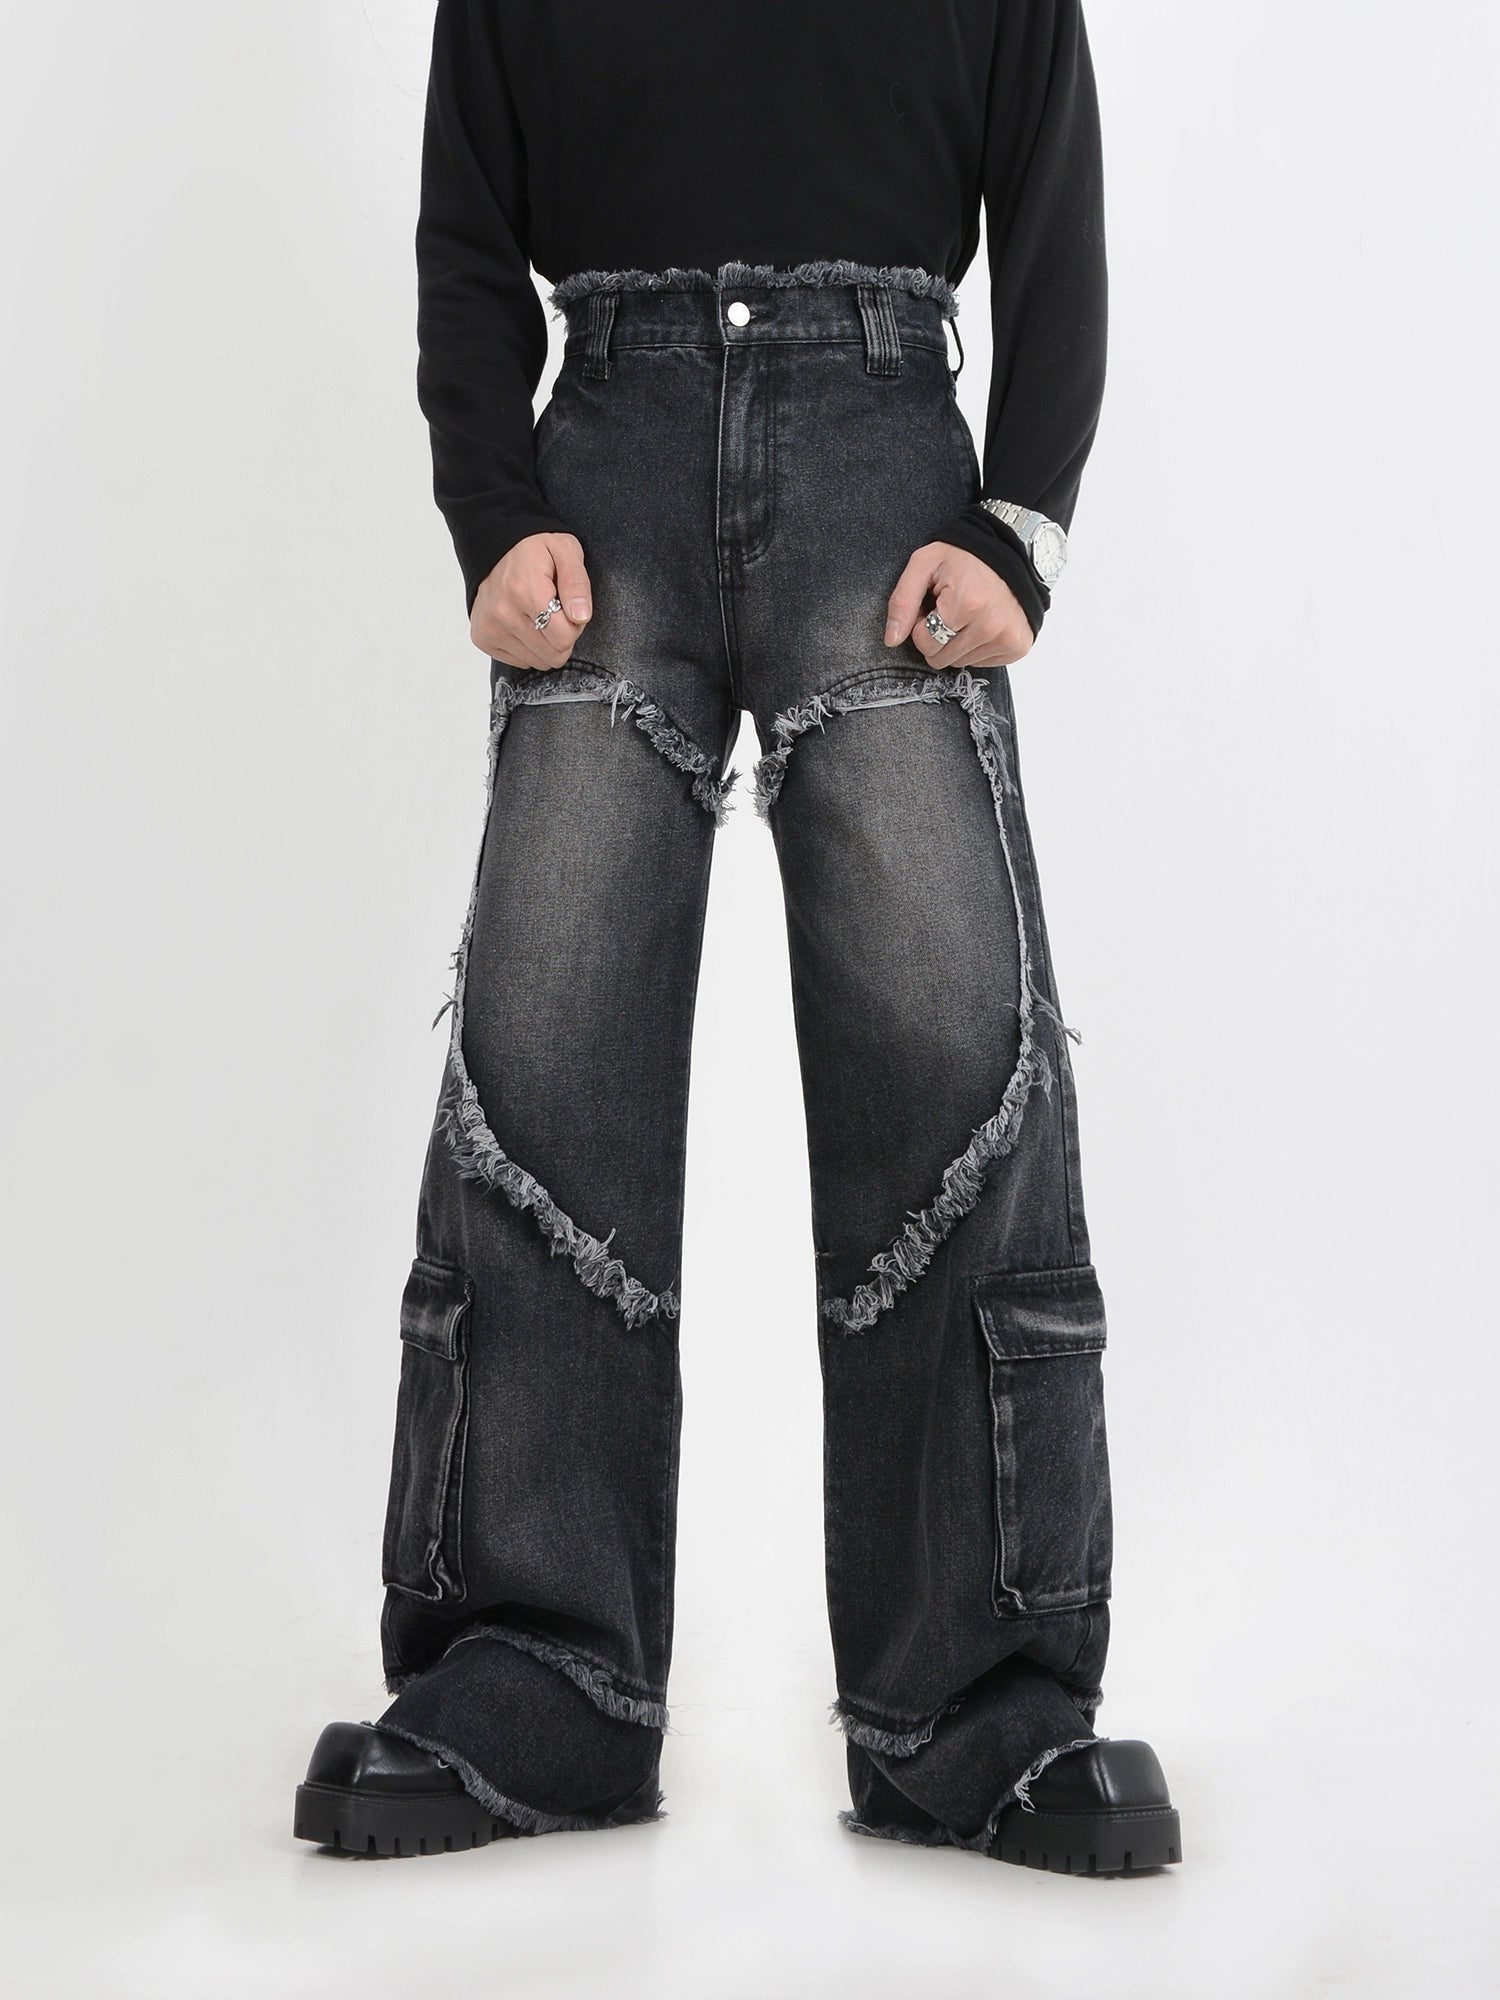 LUCE GARMENT niche deconstructed heavy-duty washed raw edge jeans